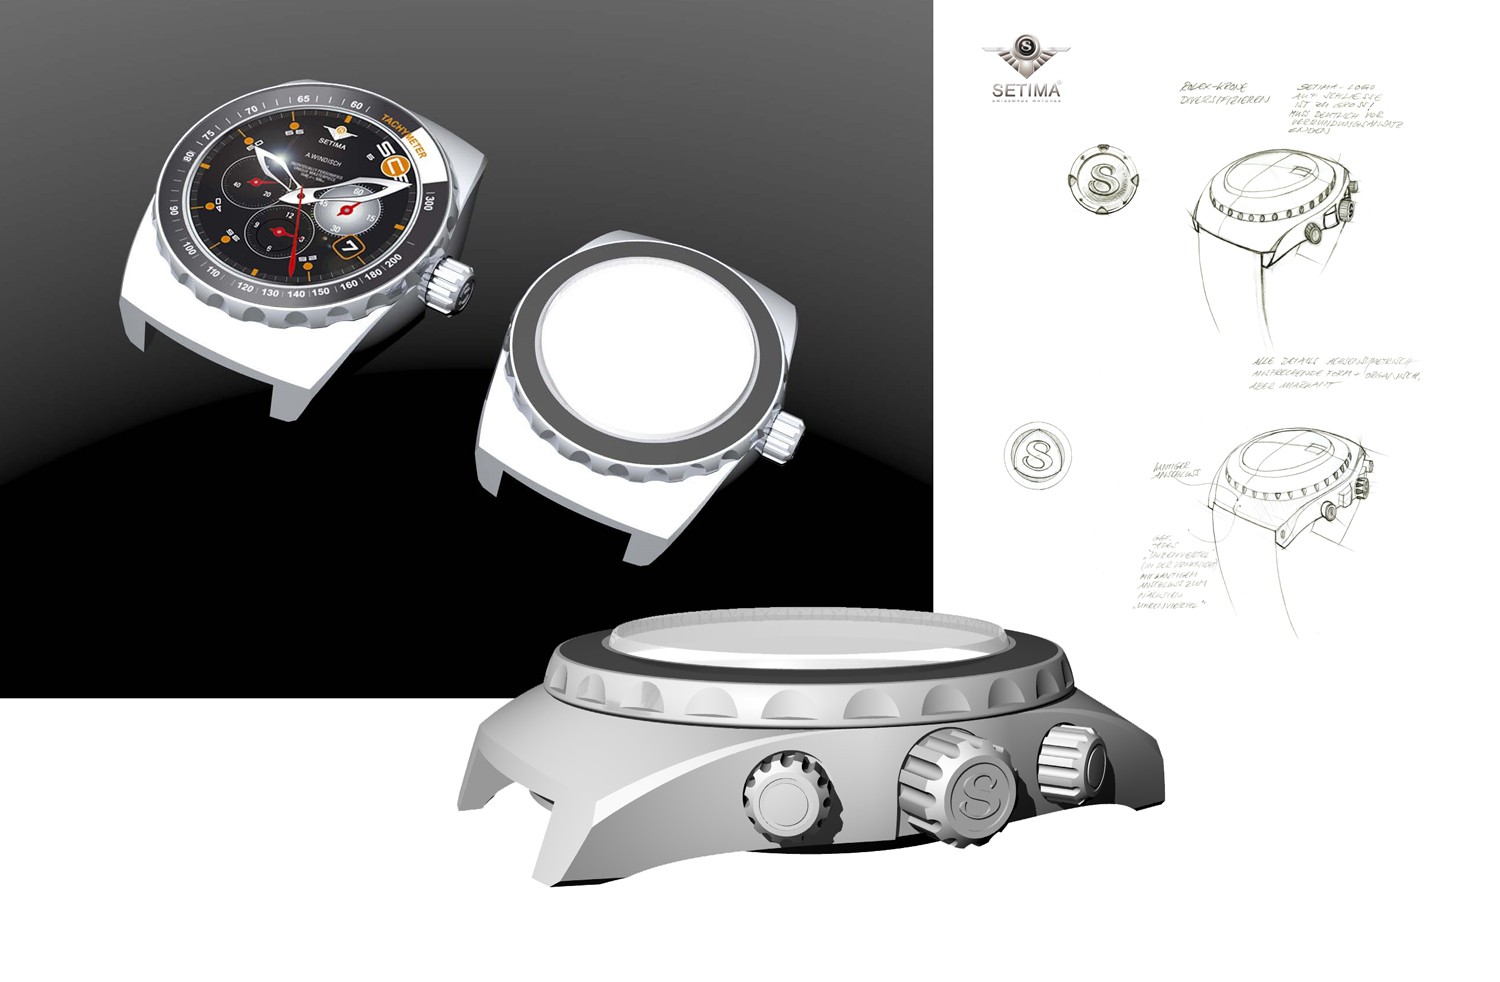 product | SETIMA | Overall wrist watch concept